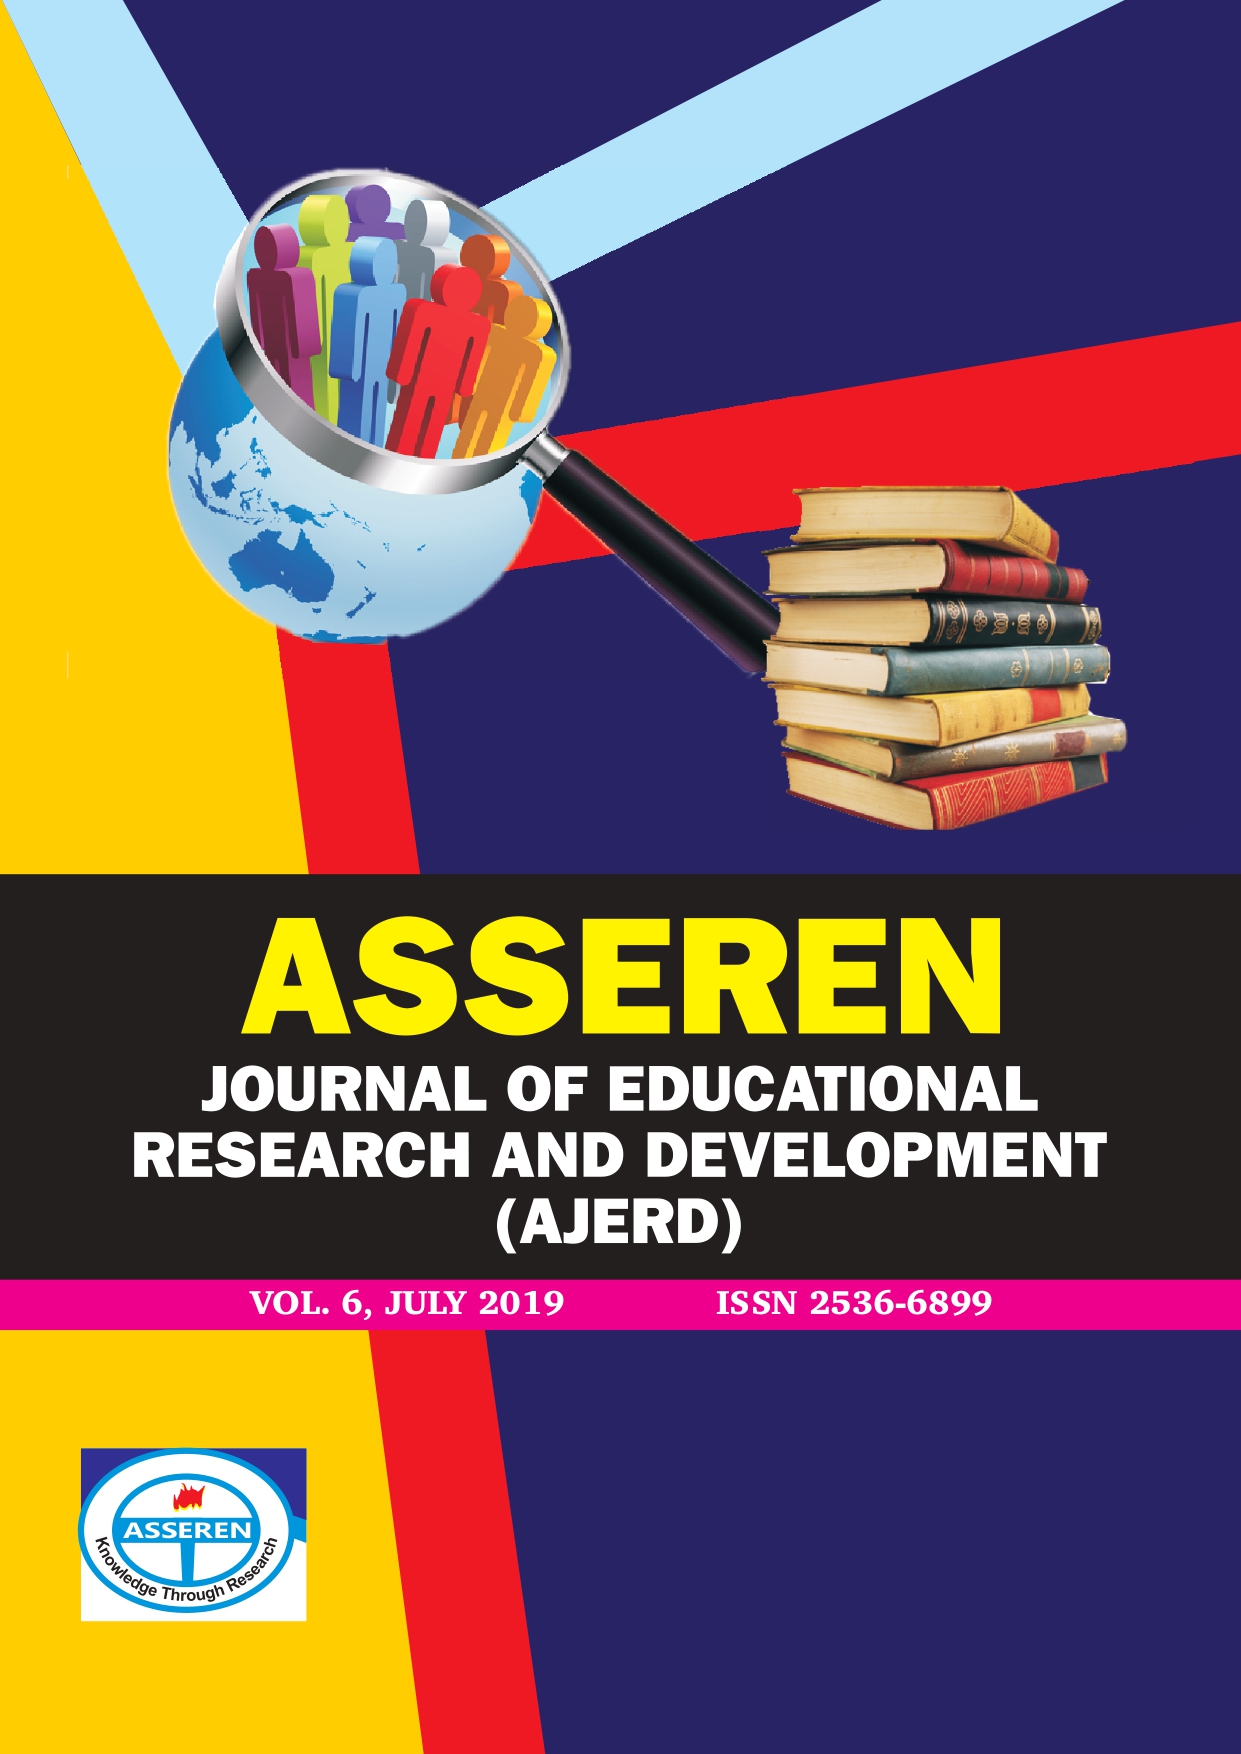 research and development journal of education